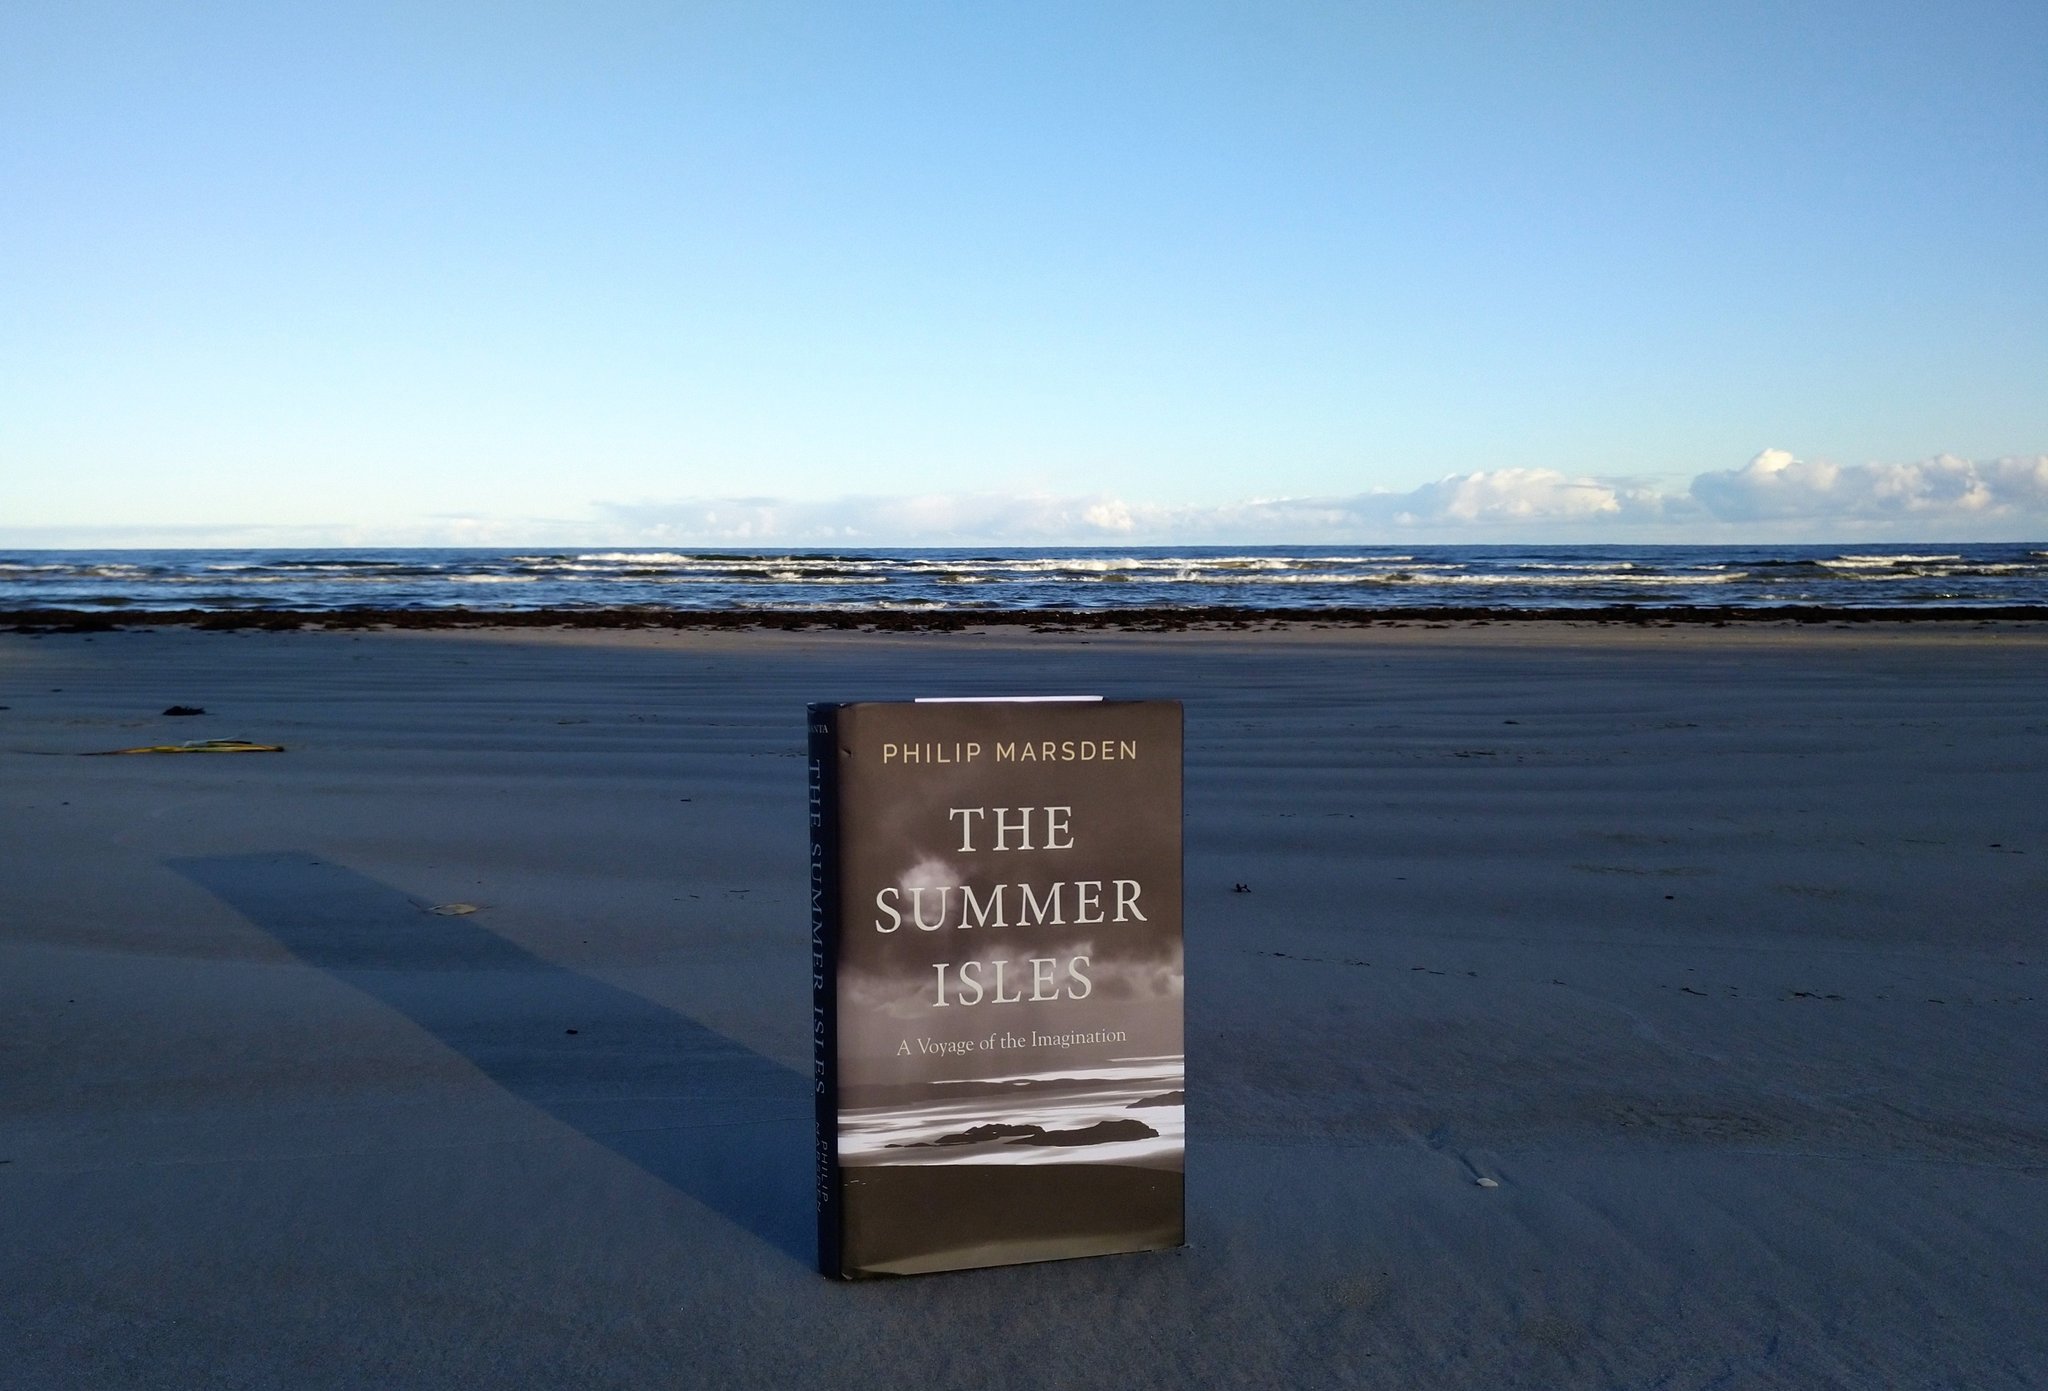 The Summer Isles: A Voyage of the Imagination by Philip Marsden is published in 2019 by Granta. Photo by Beach Books.